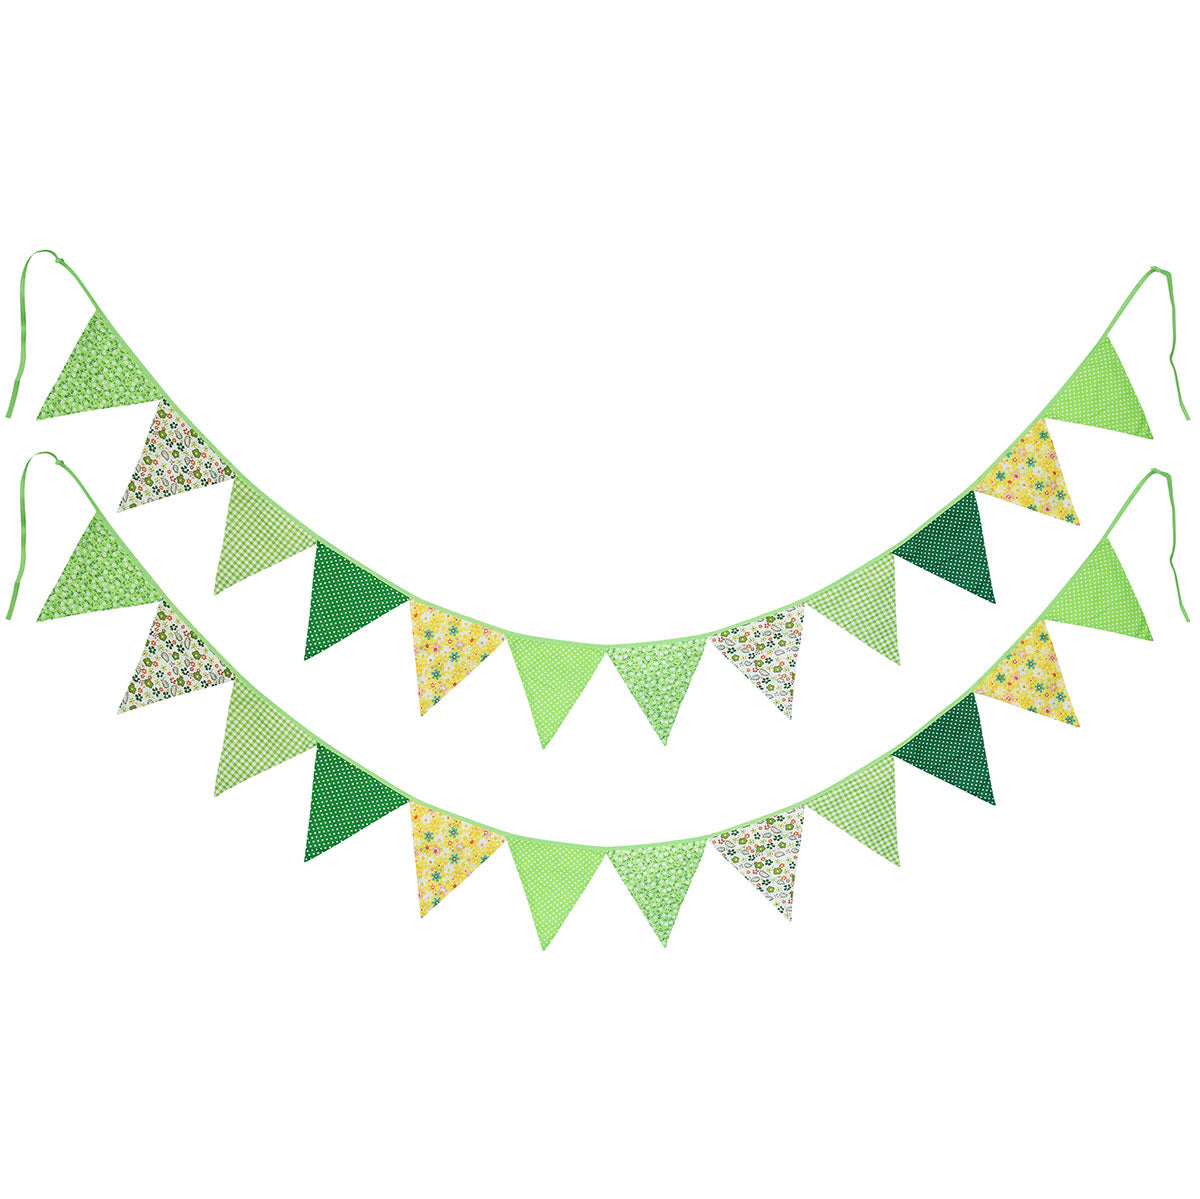 2 Green Cotton Pennant Banners